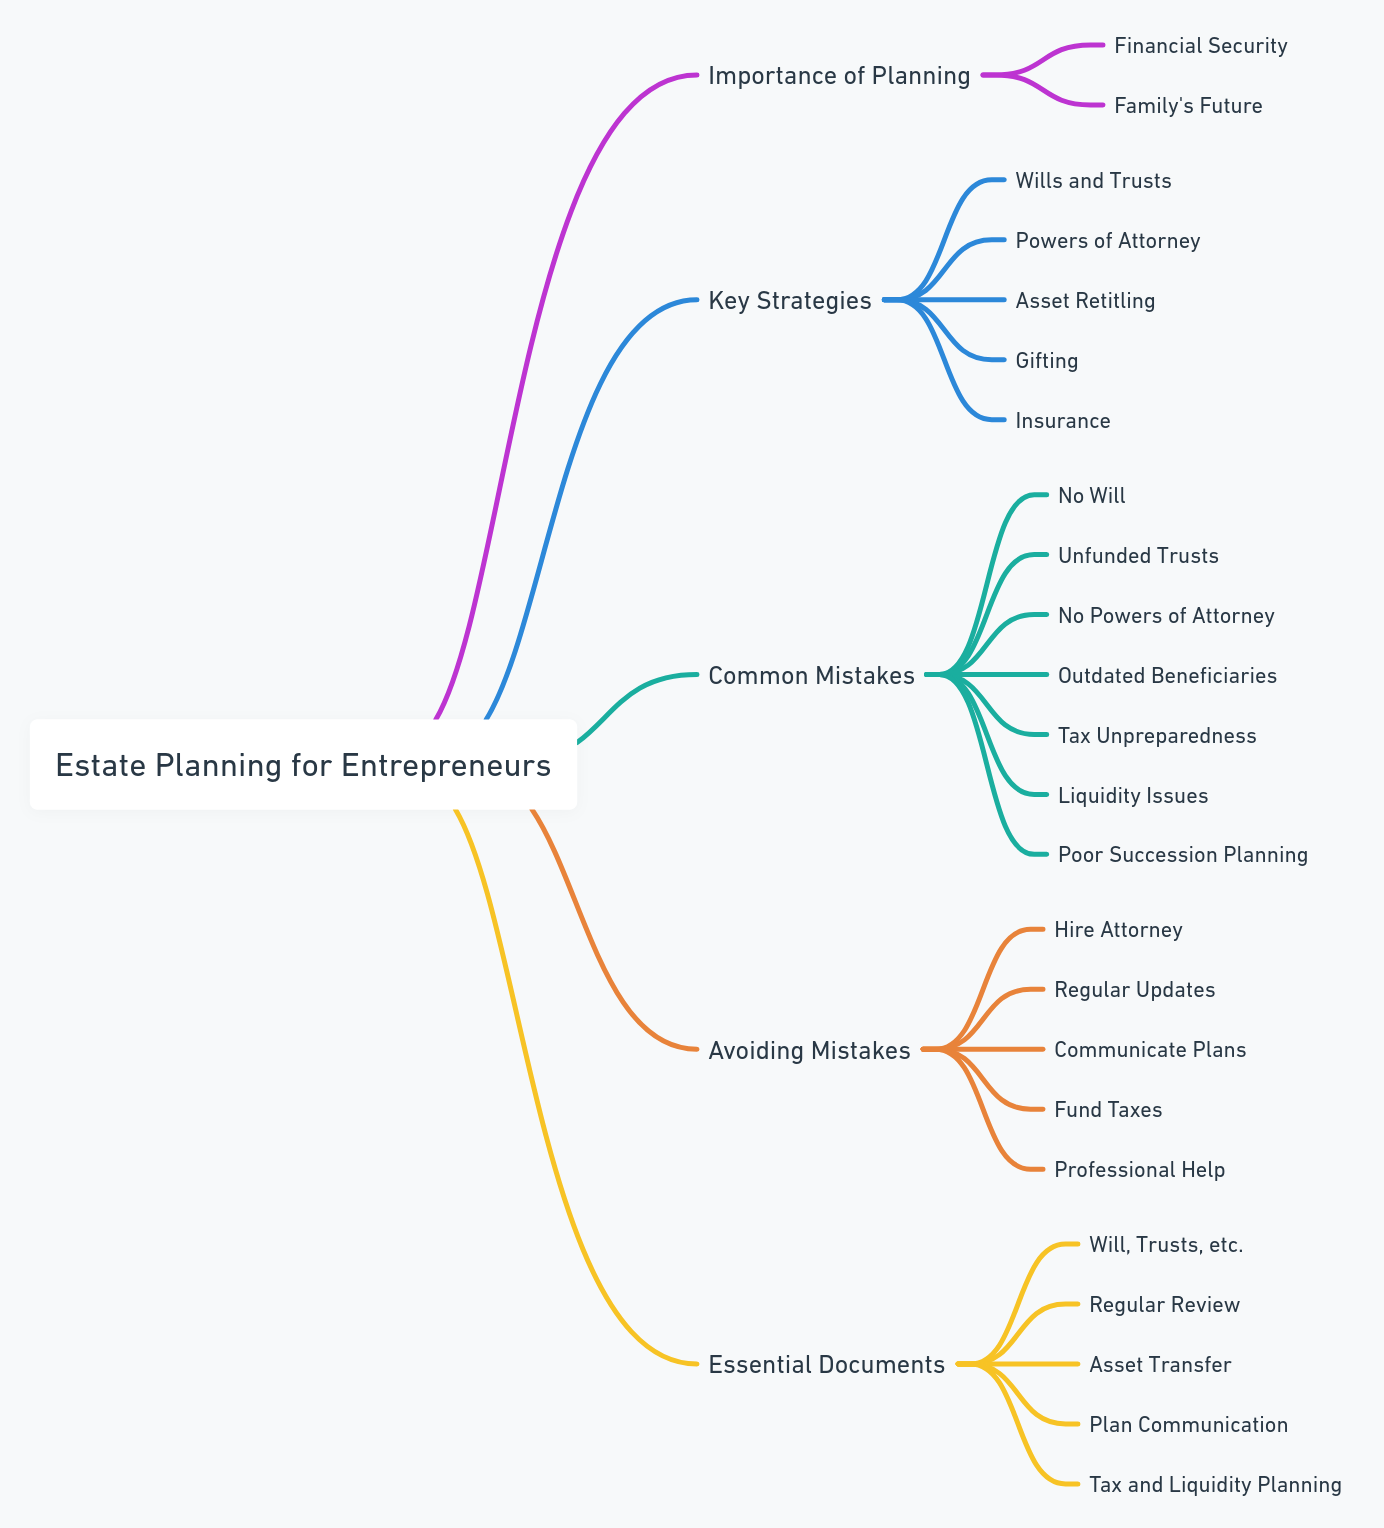 Mind map outlining key aspects of estate planning for entrepreneurs, including planning importance, key strategies, common mistakes, mistake avoidance, and essential documents.